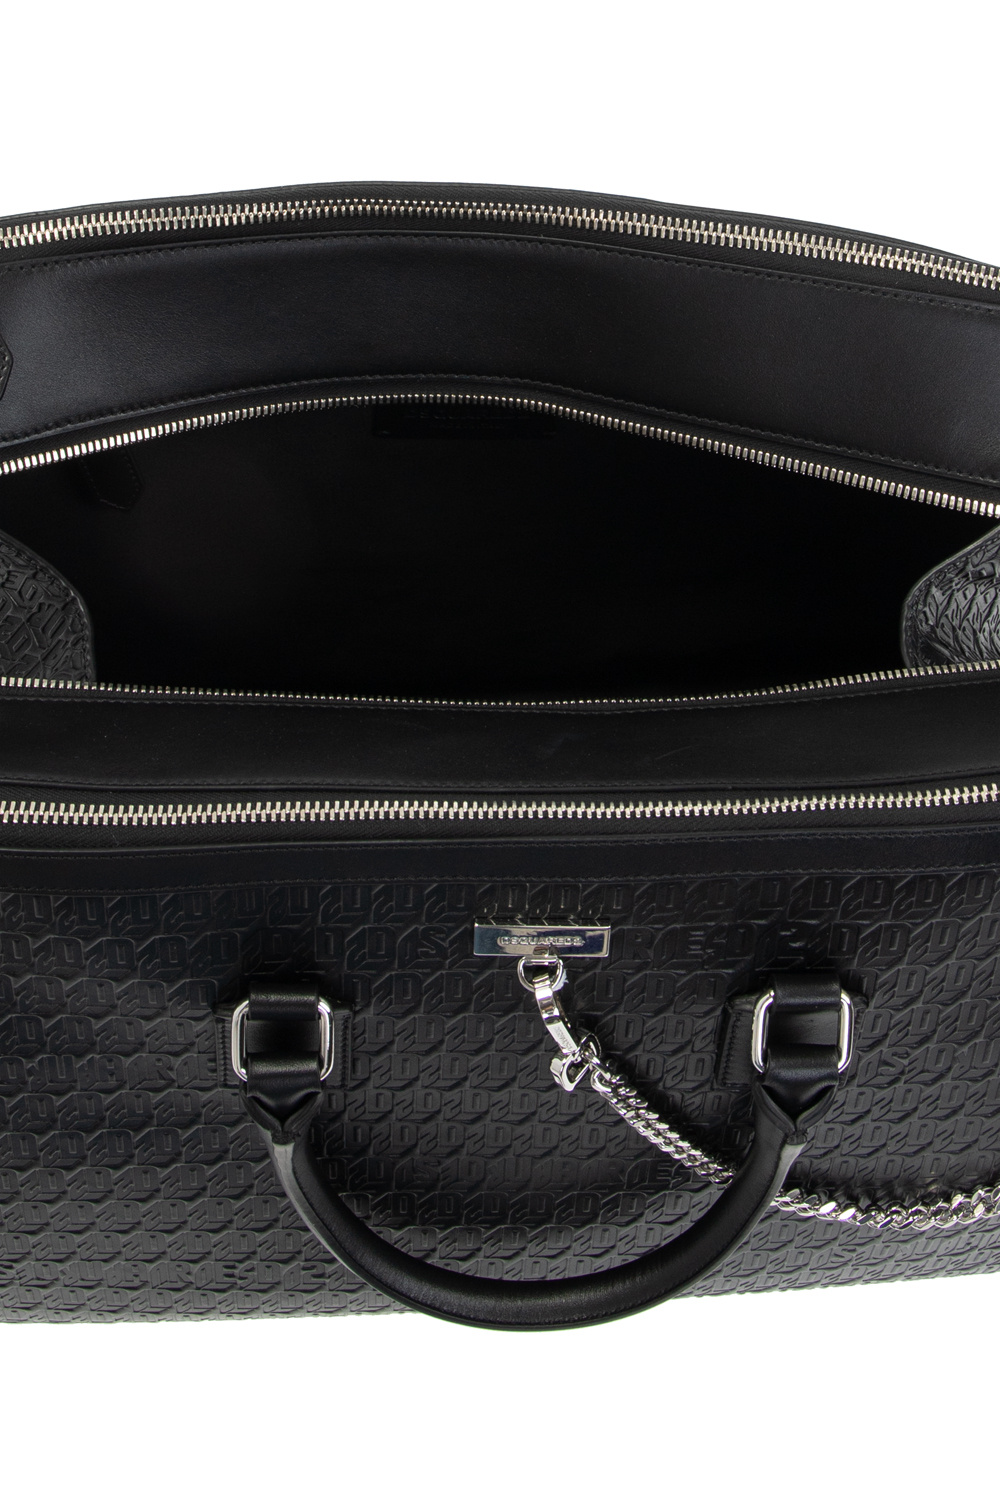 Dsquared2 Holdall bag with logo